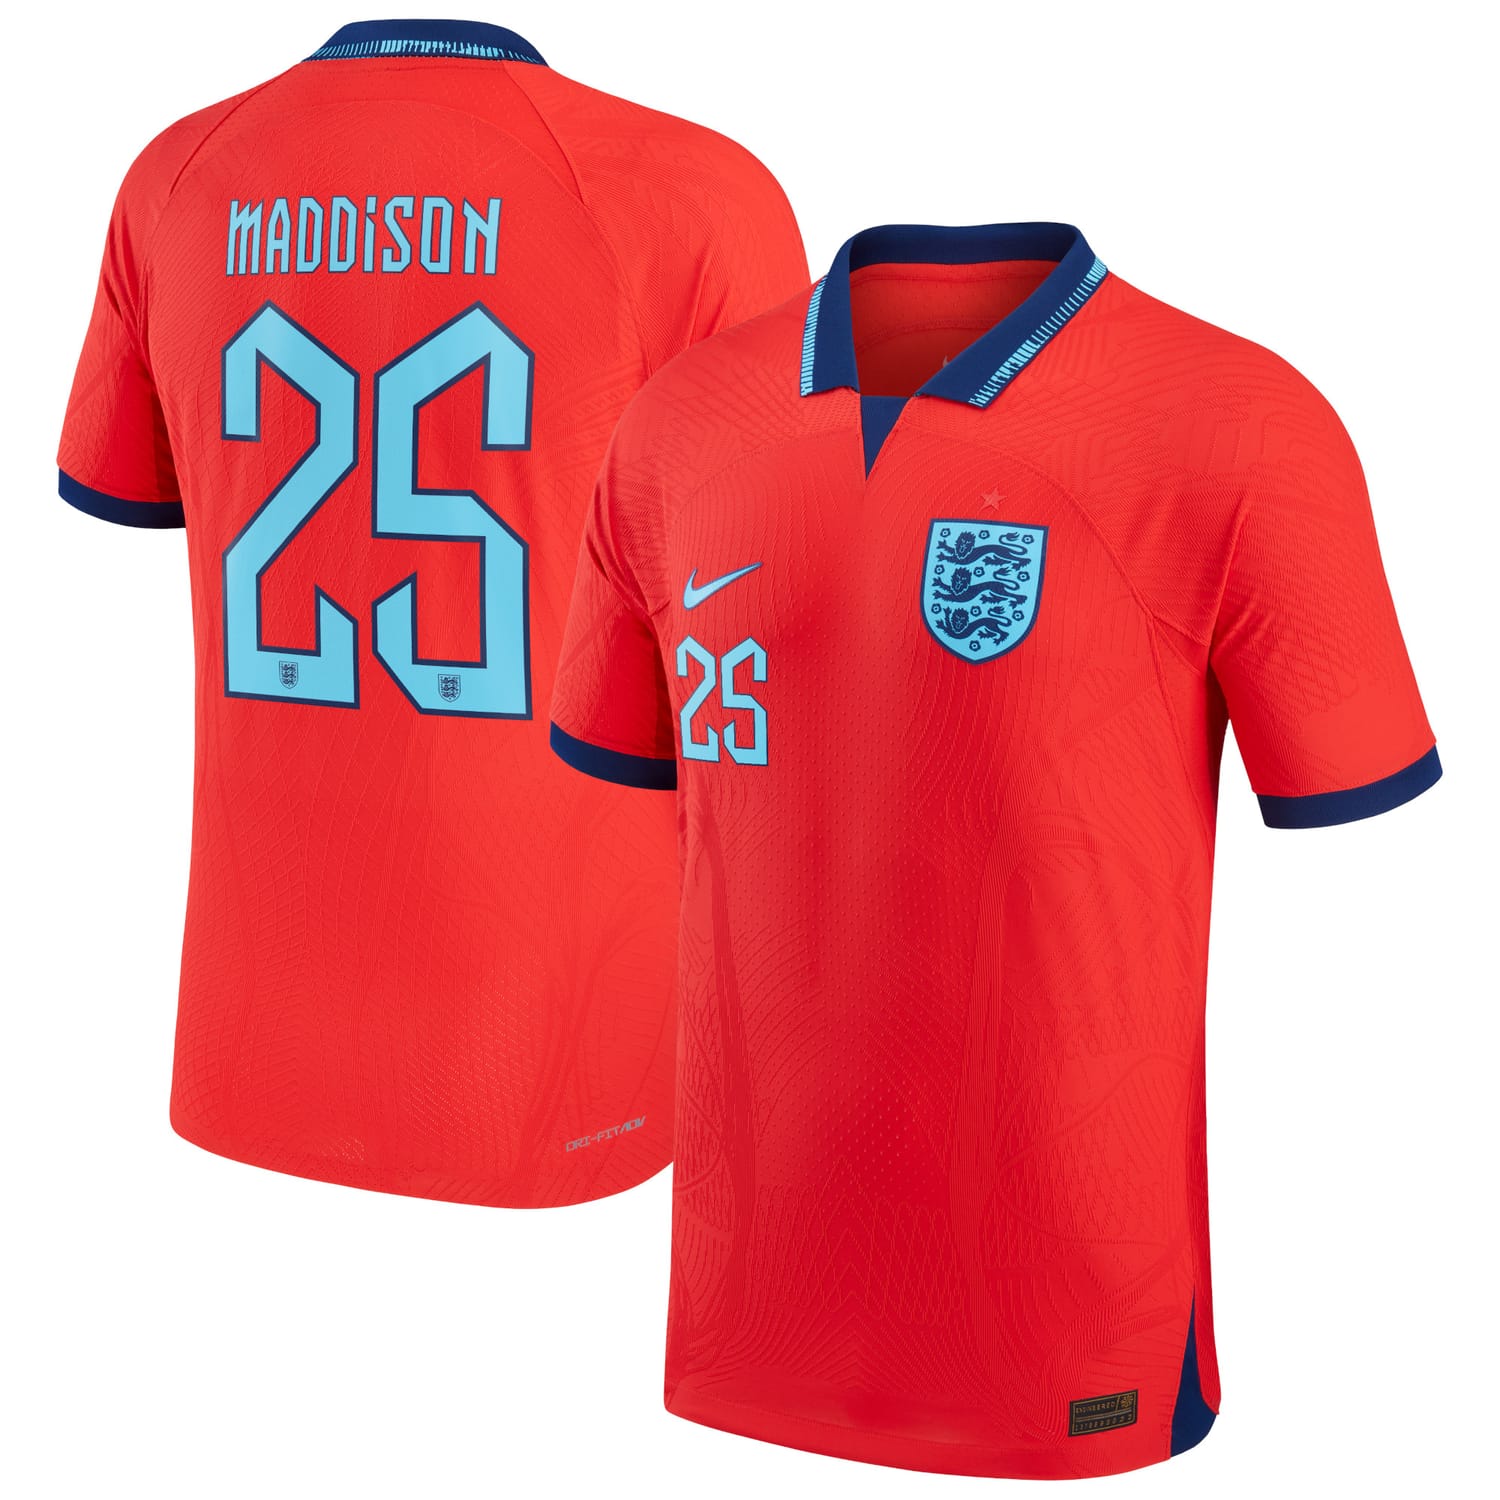 England National Team Away Authentic Jersey Shirt 2022 player James Maddison 25 printing for Men